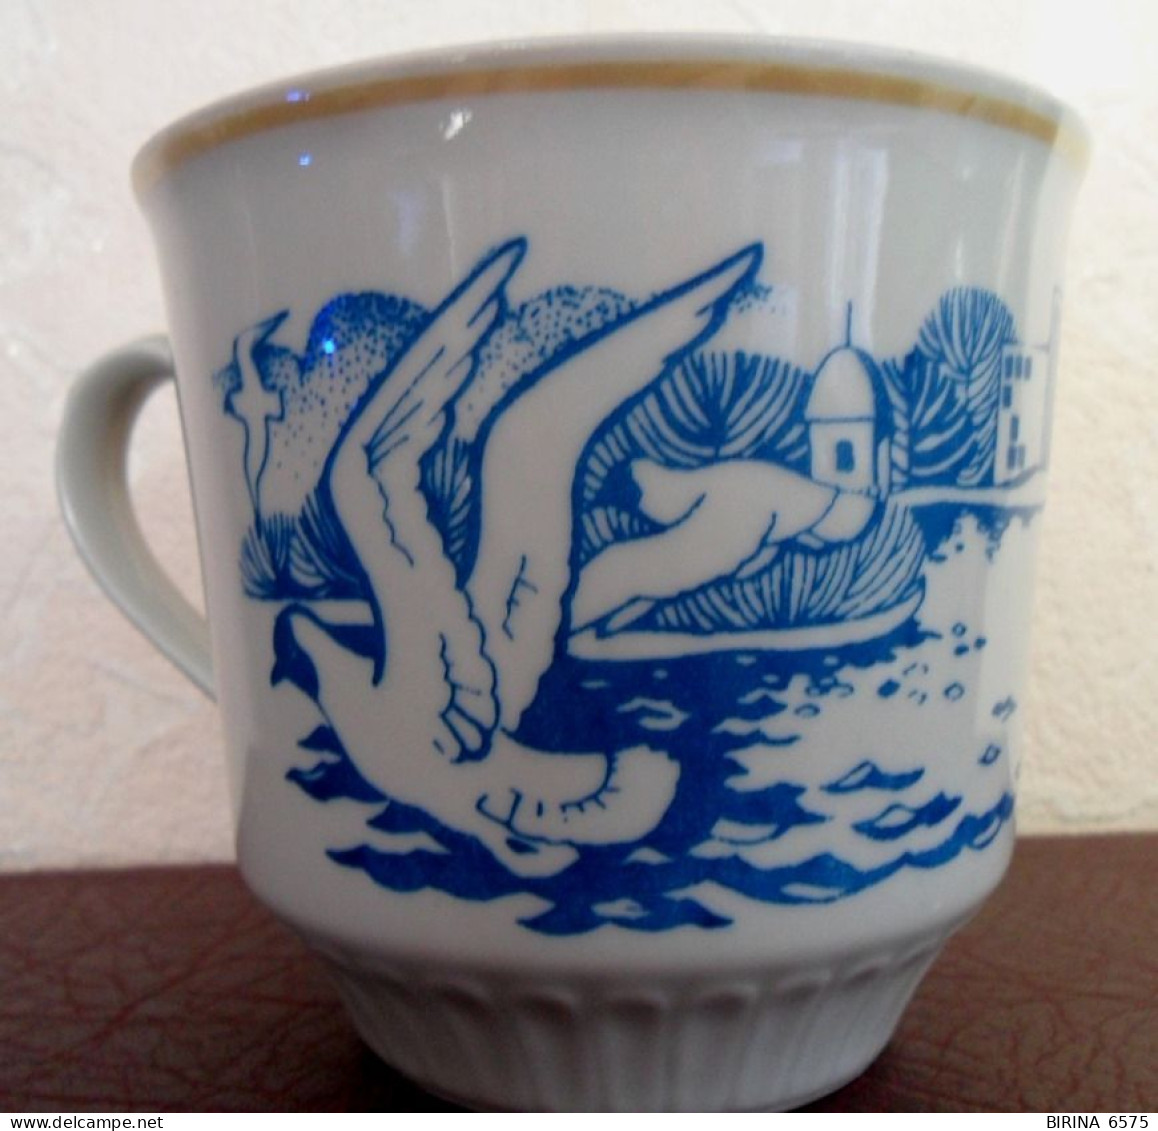 A Cup. Cup. SEAGULLS. Sea. TERNOPIL PORCELAIN FACTORY. USSR. - 8-48-i - Tasses